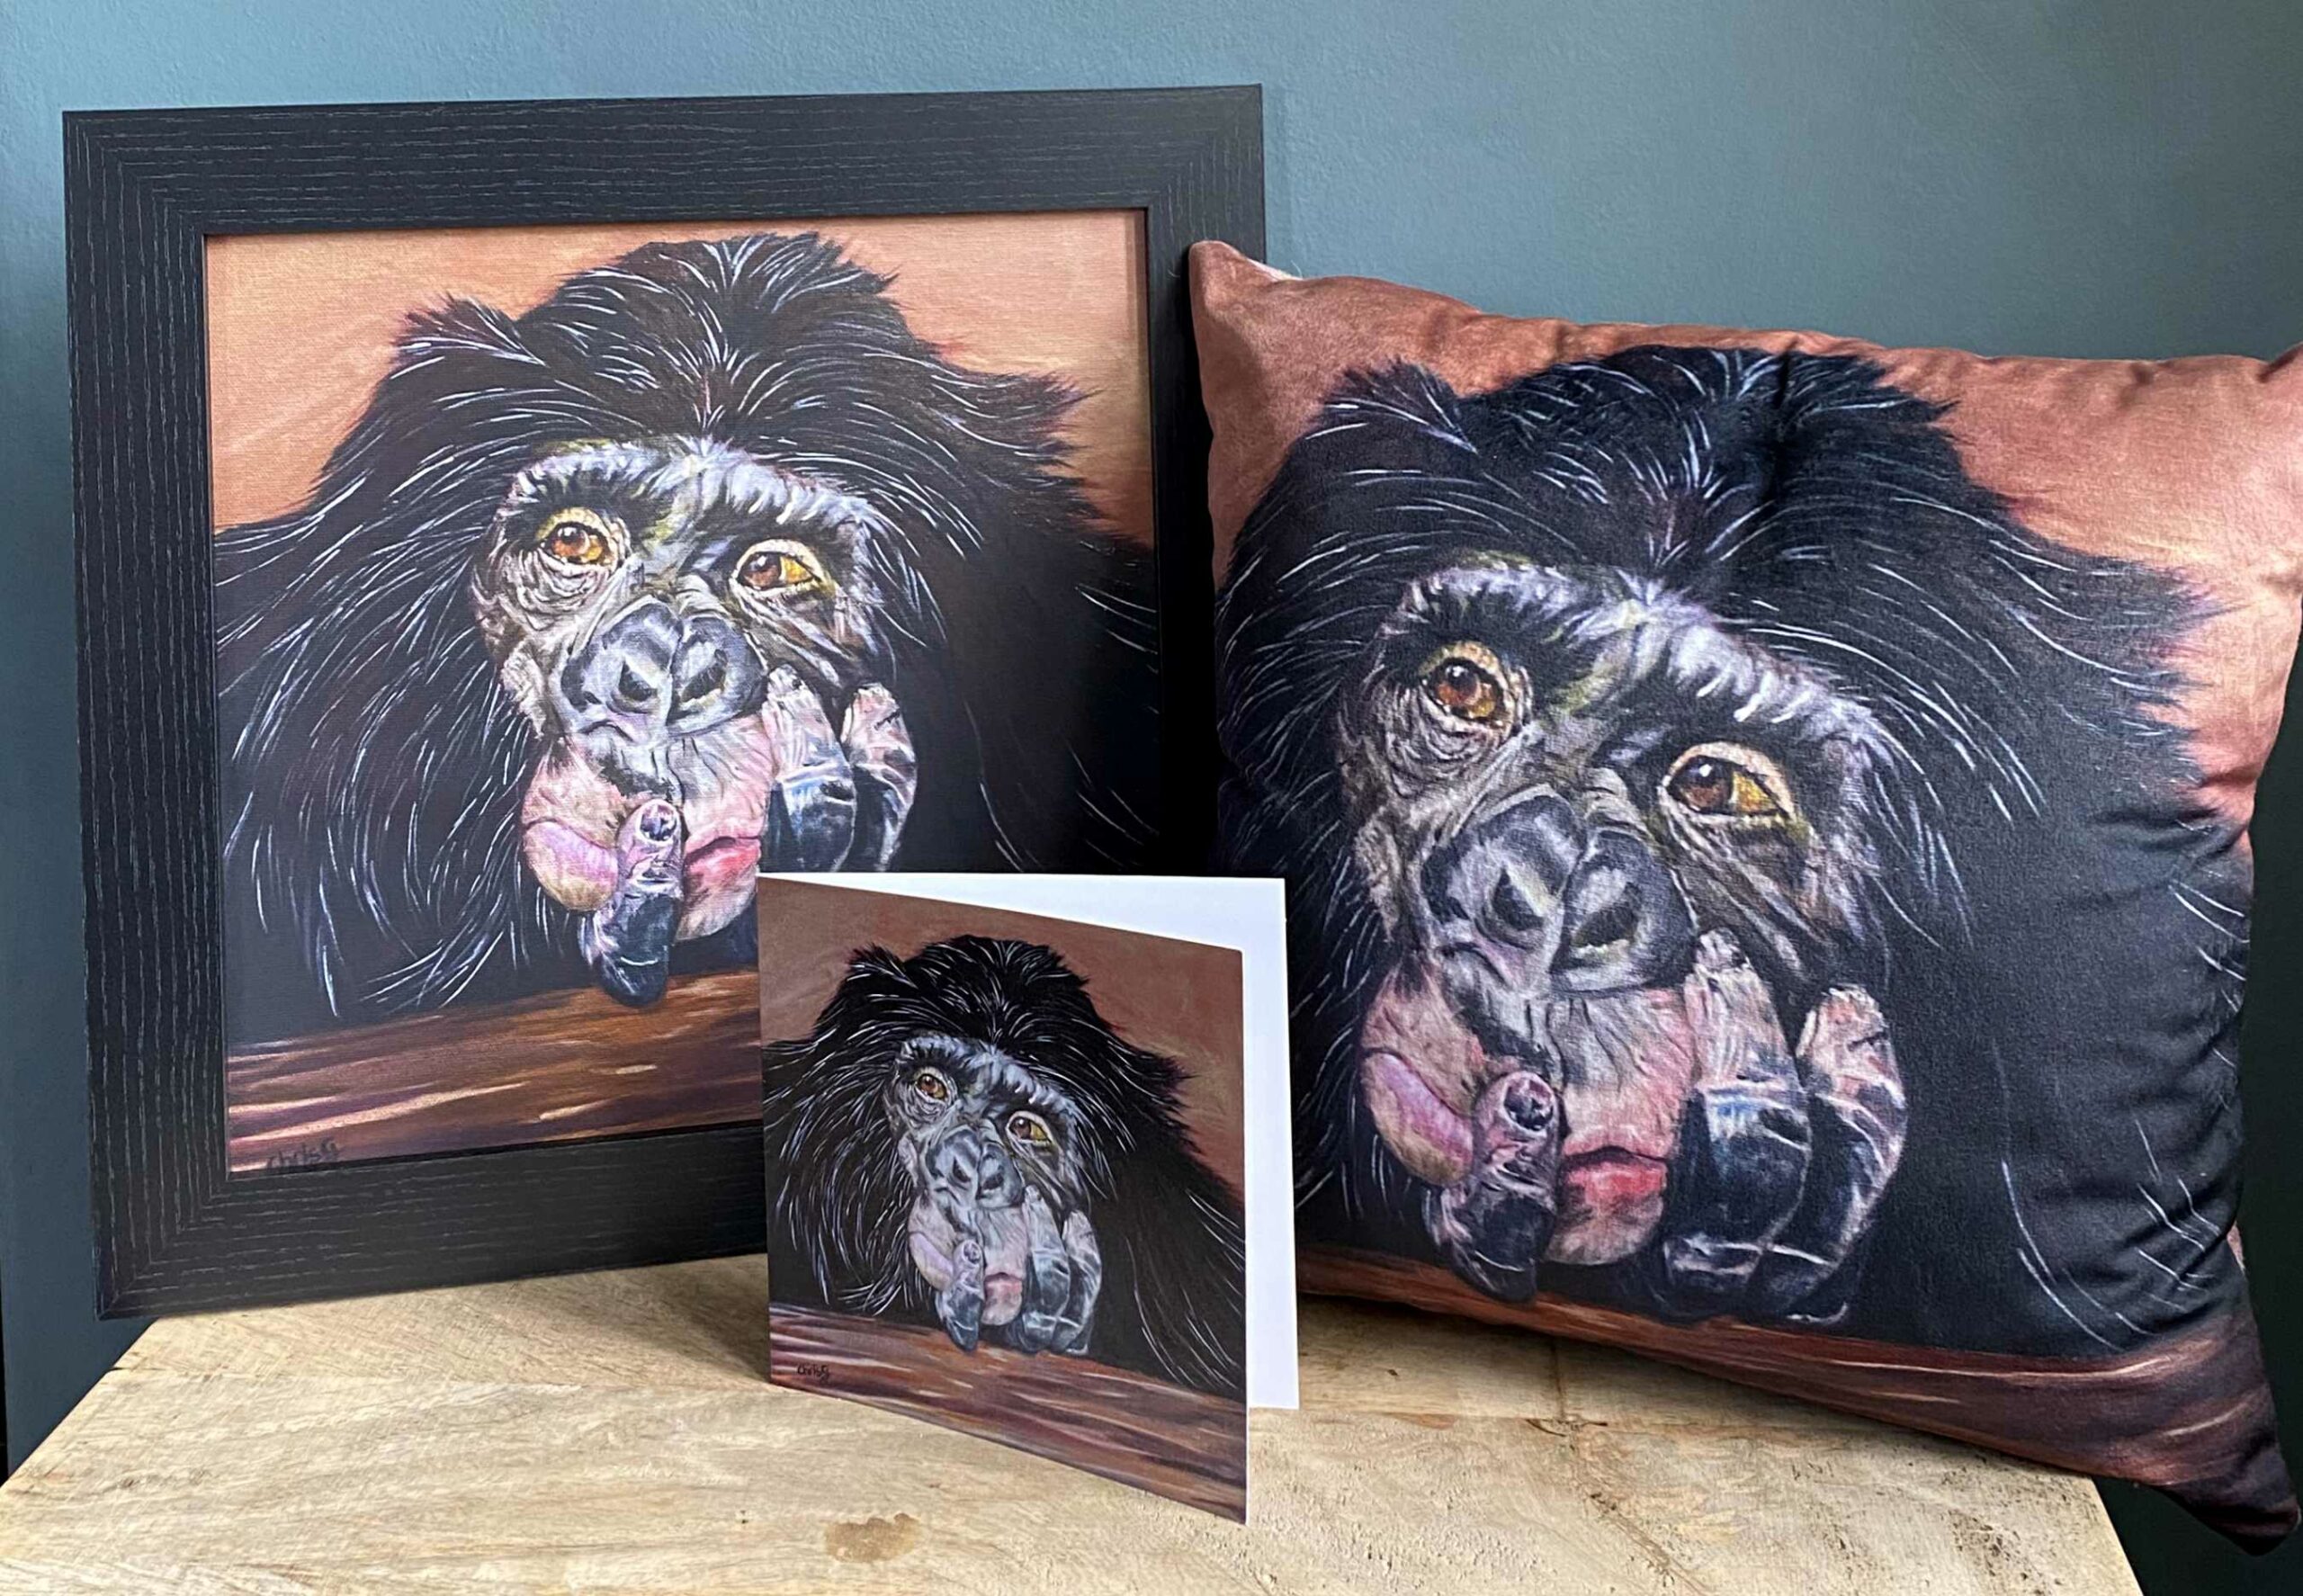 Framed canvas print, cushion soft velvet, and gift card all with Ruby my thoughtful chimp on